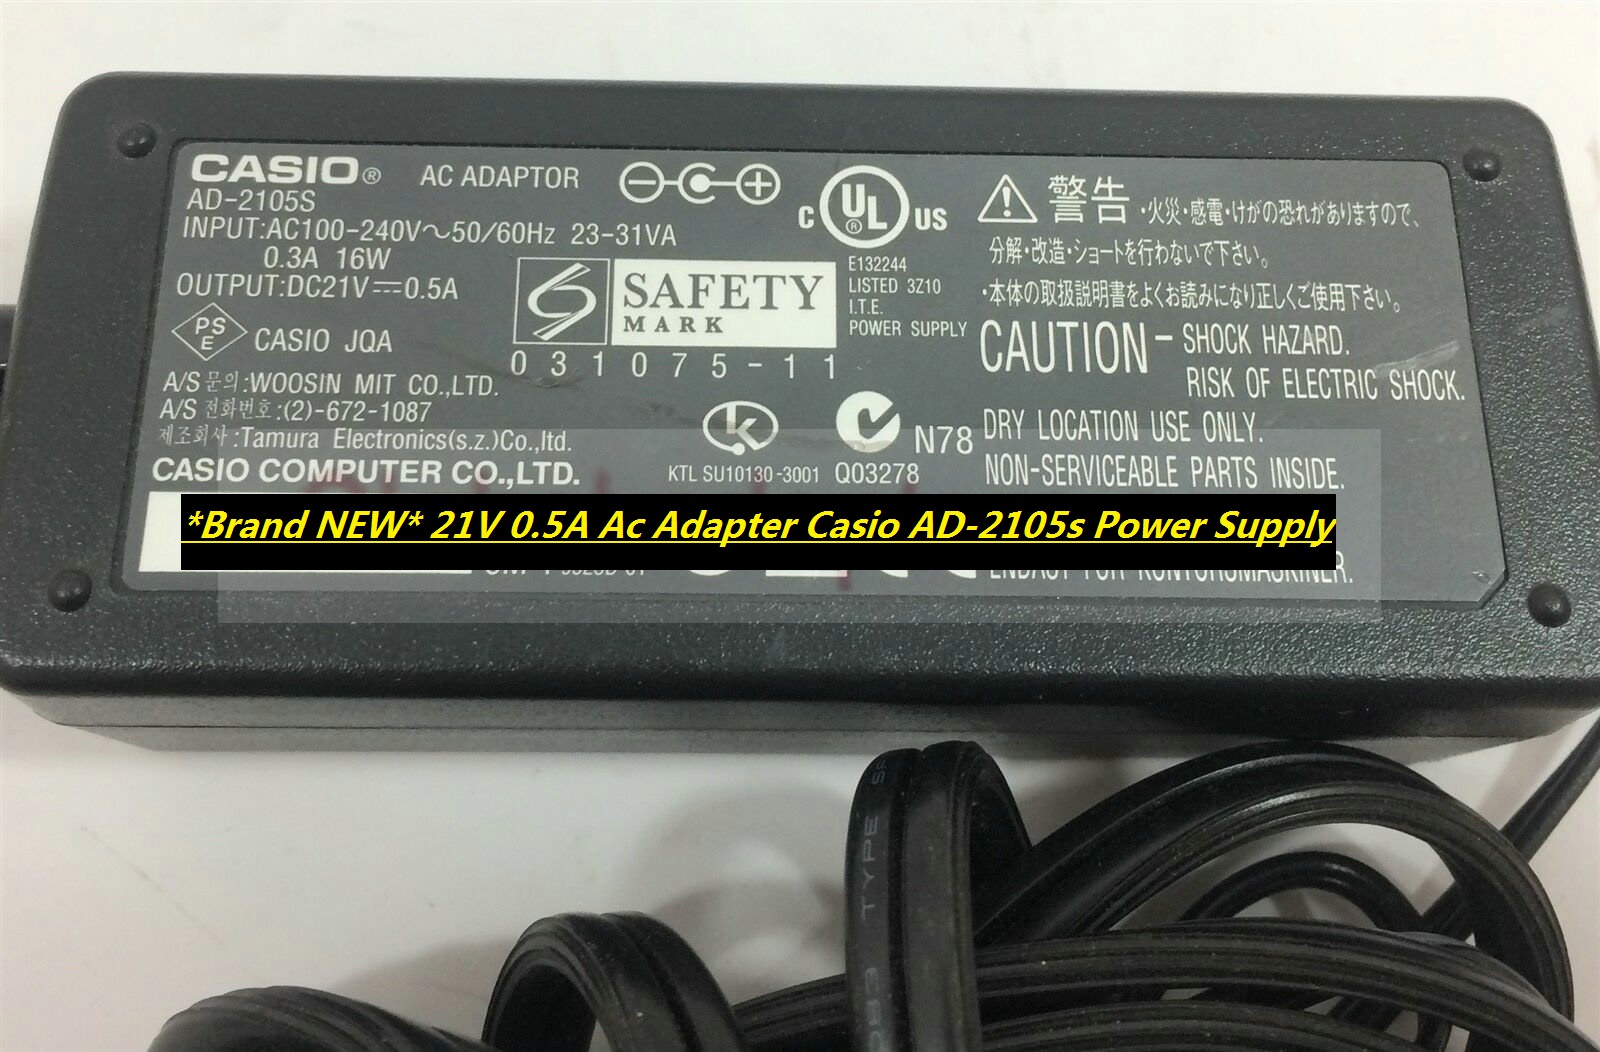 *Brand NEW* 21V 0.5A Ac Adapter Casio AD-2105s Power Supply